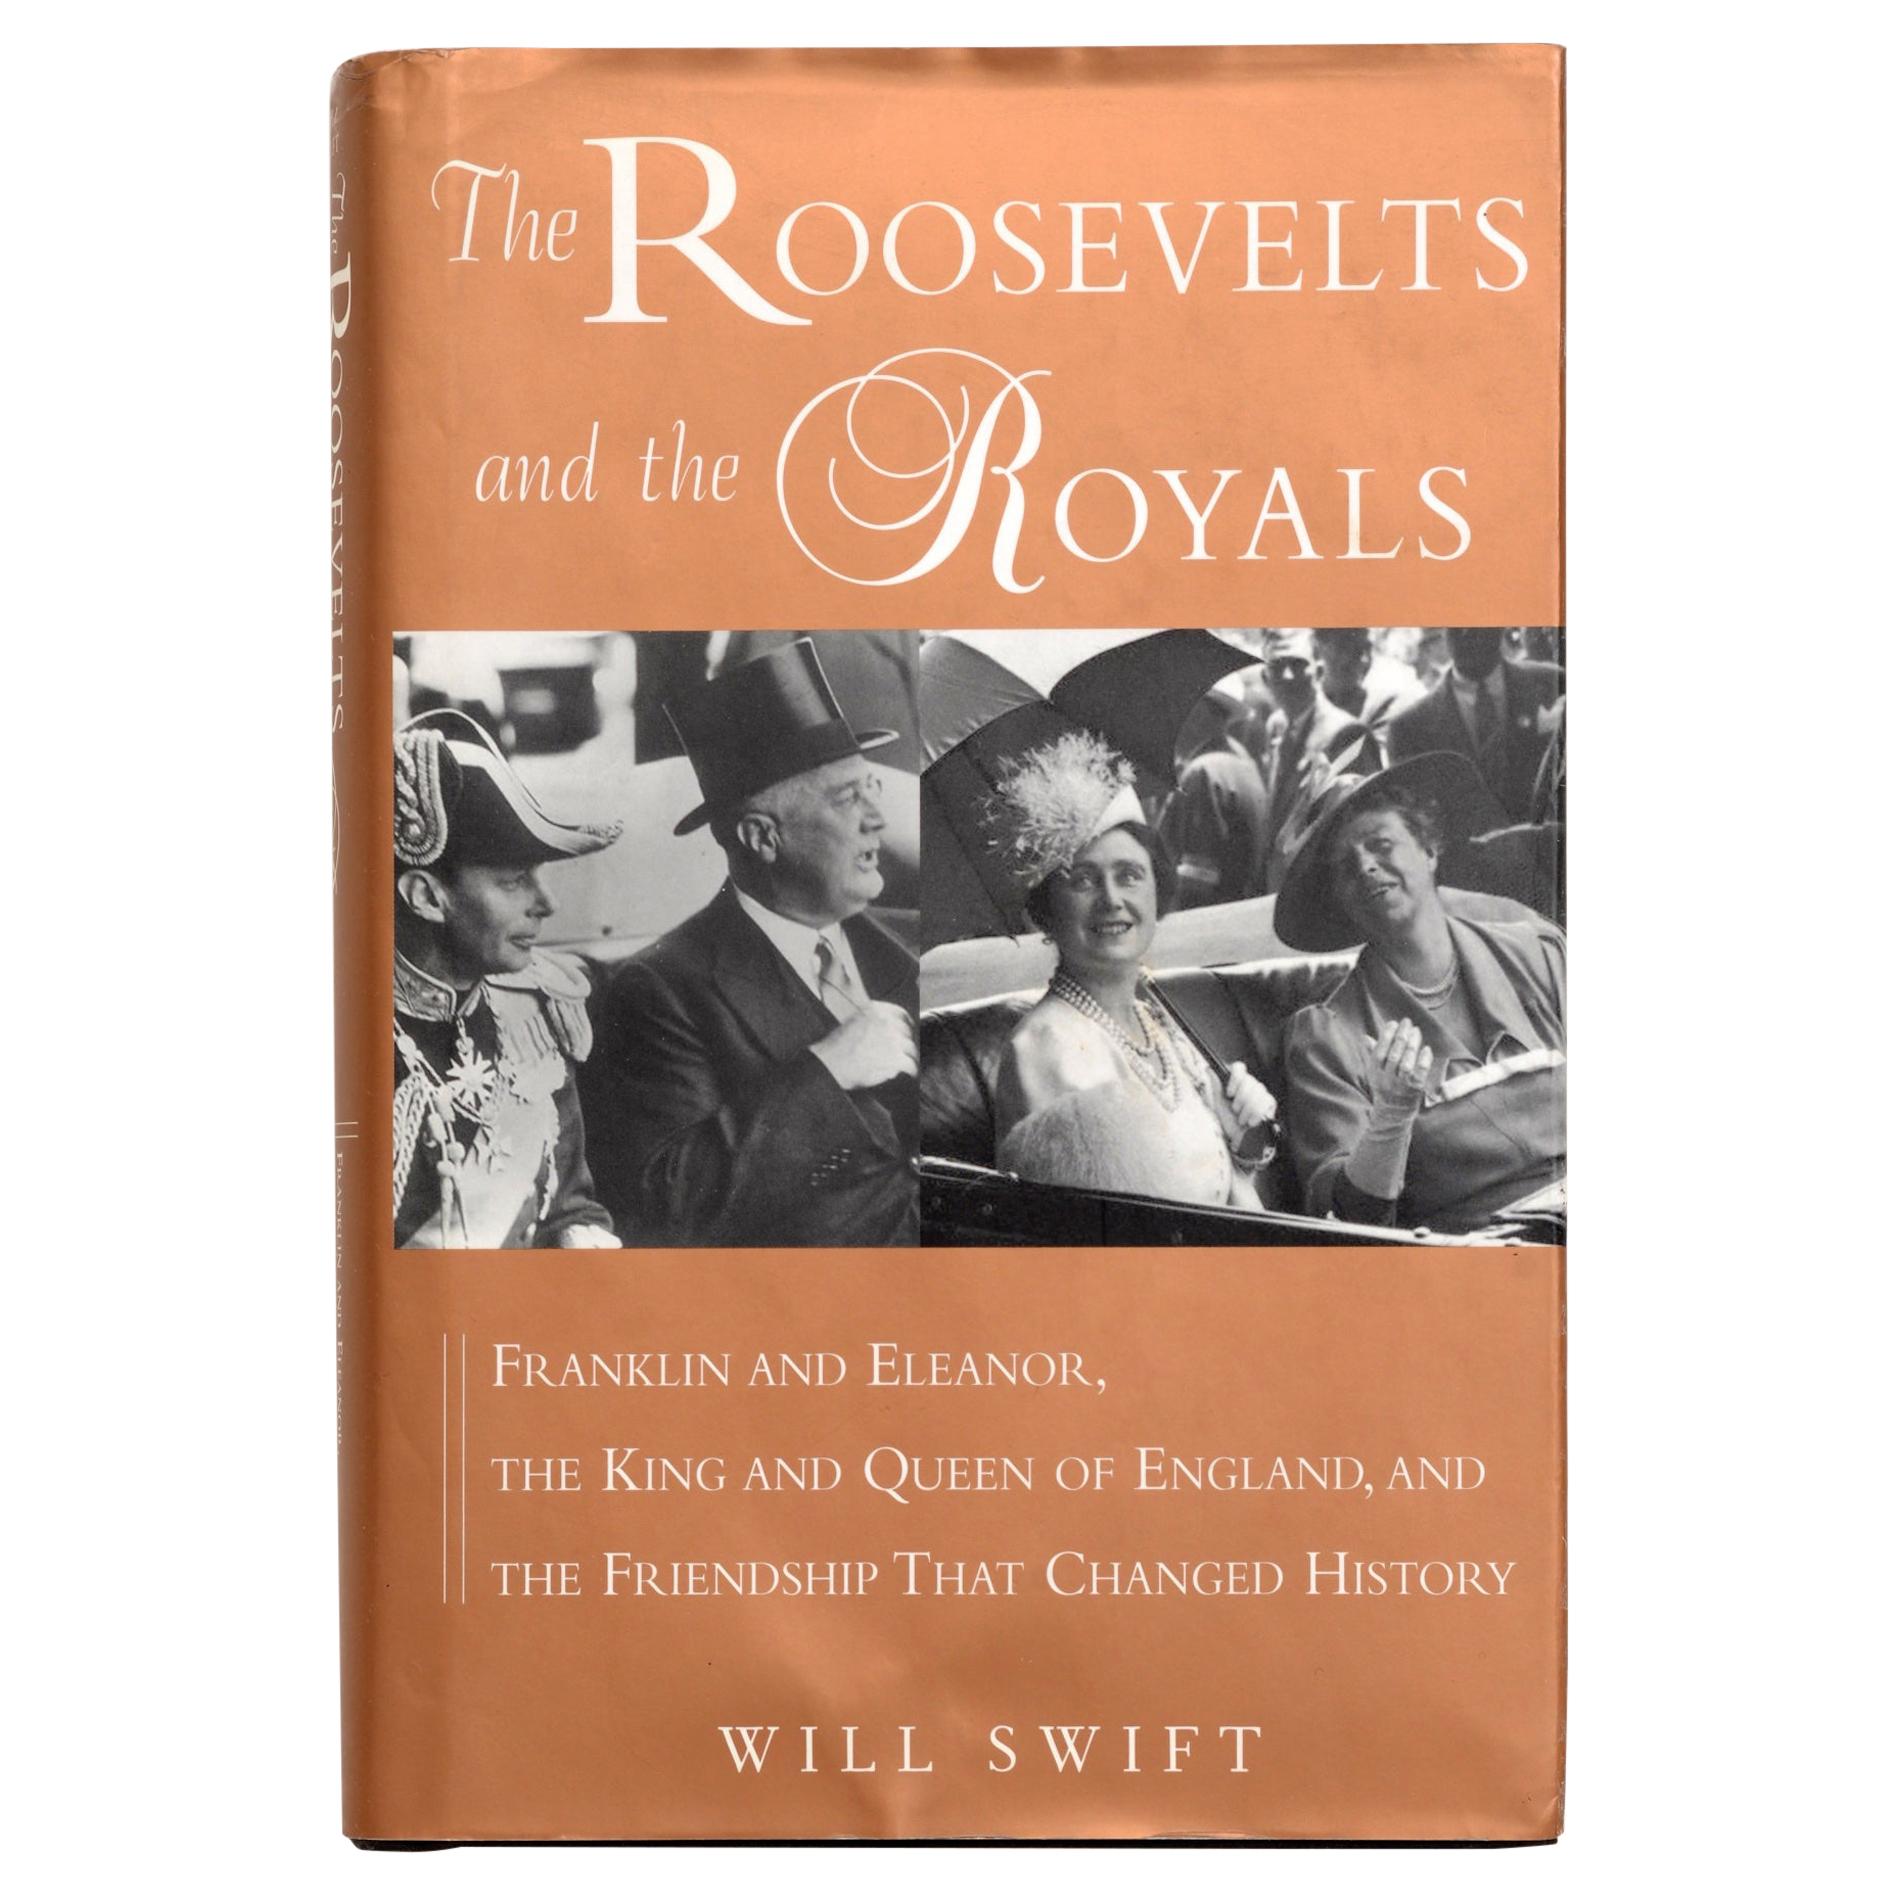 "The Roosevelts and the Royals", Signed First Ed by Will Swift